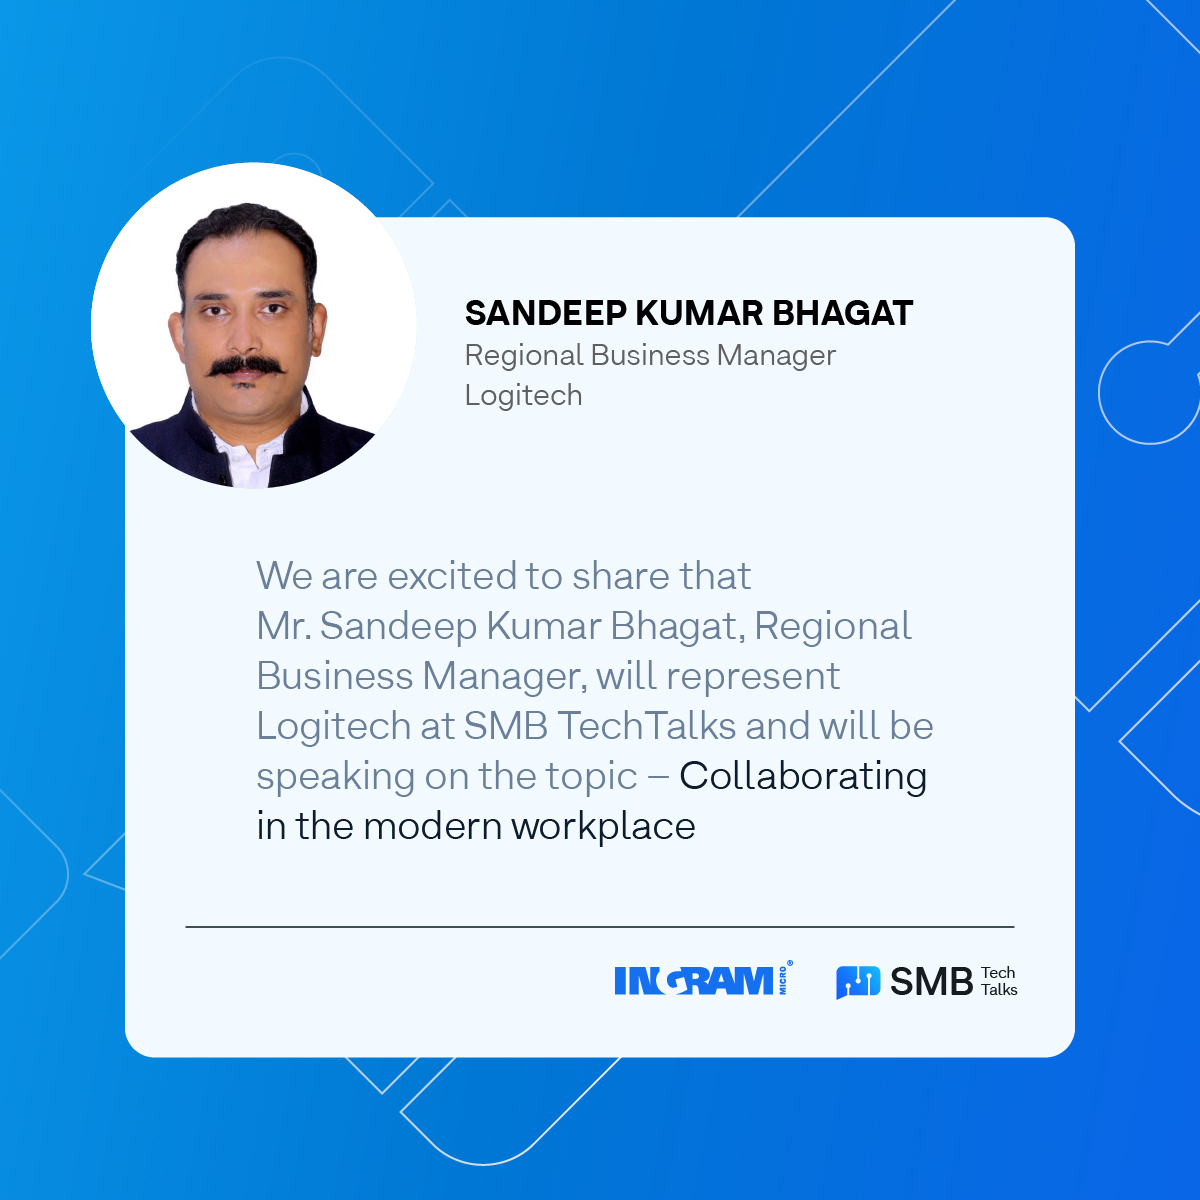 SMB TechTalks: Get Ready for Valuable Insights by Eminent Technology Leaders! @Acer @Adobe @Logitech @HPE_India @MicrosoftIndia @cisco_in #ingrammicroindia #SMBTechTalks